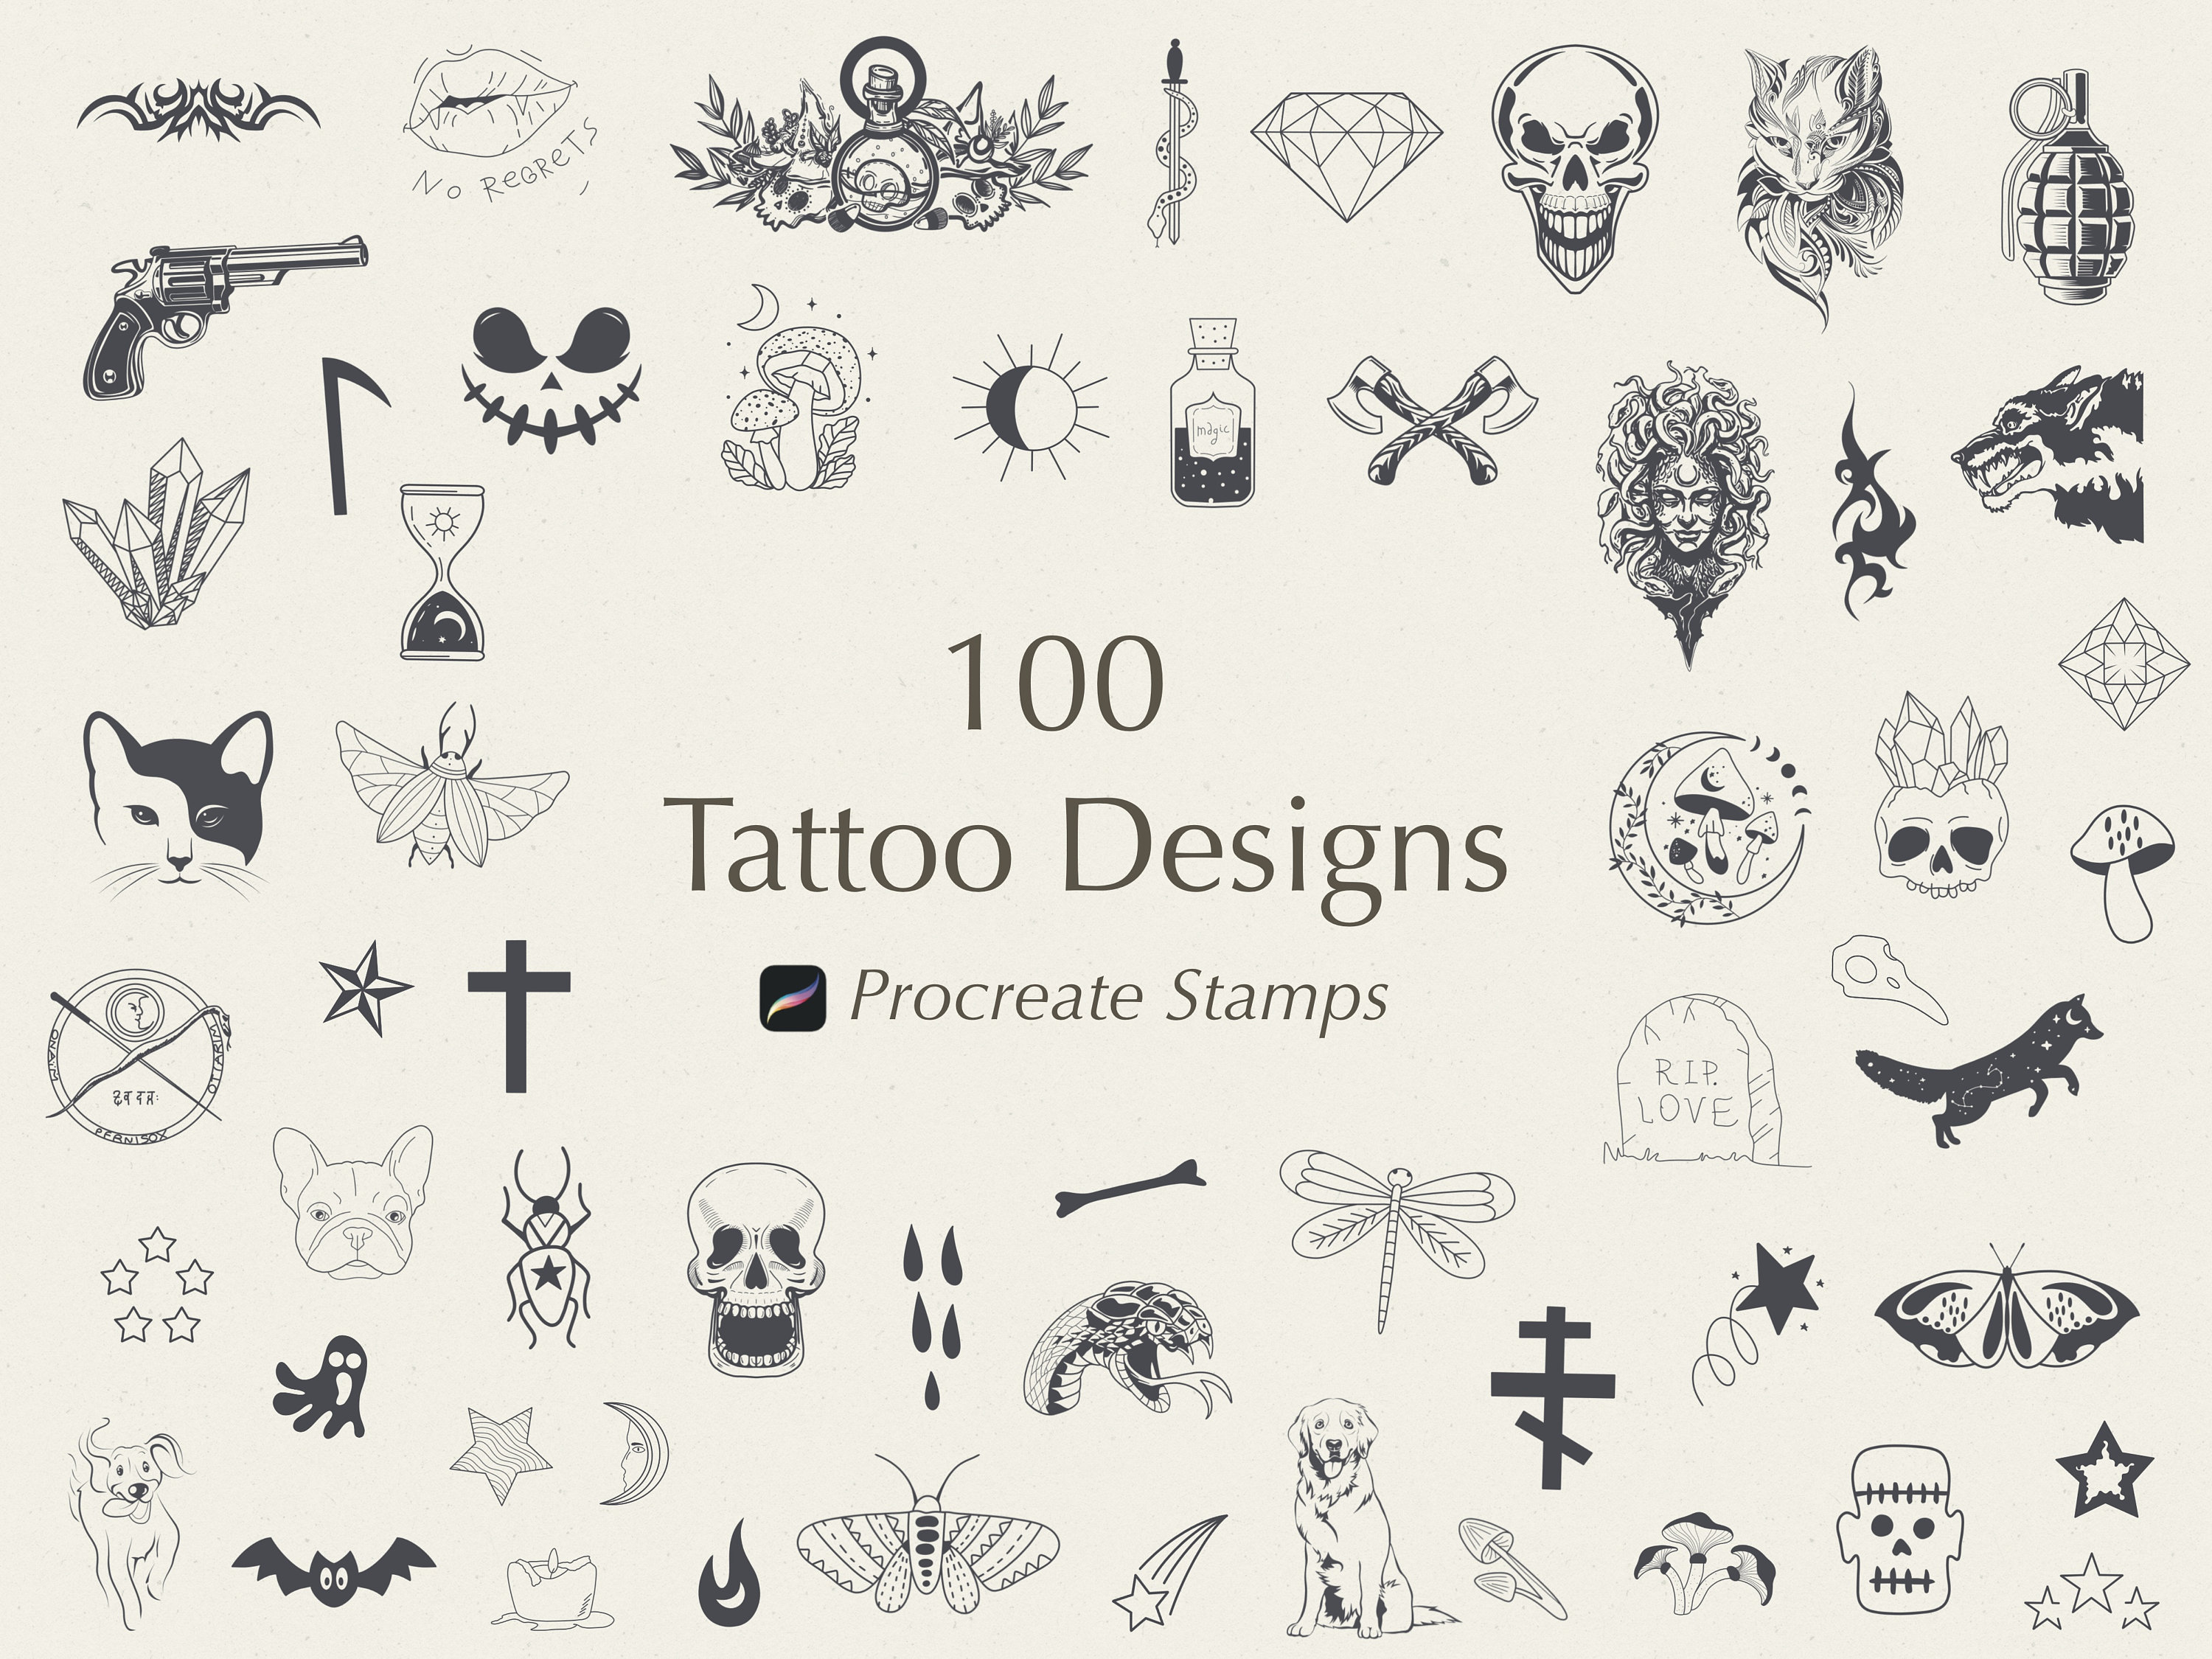 Stencils Traditional Tattoo Designs Ready-to-use, Easy-to-apply